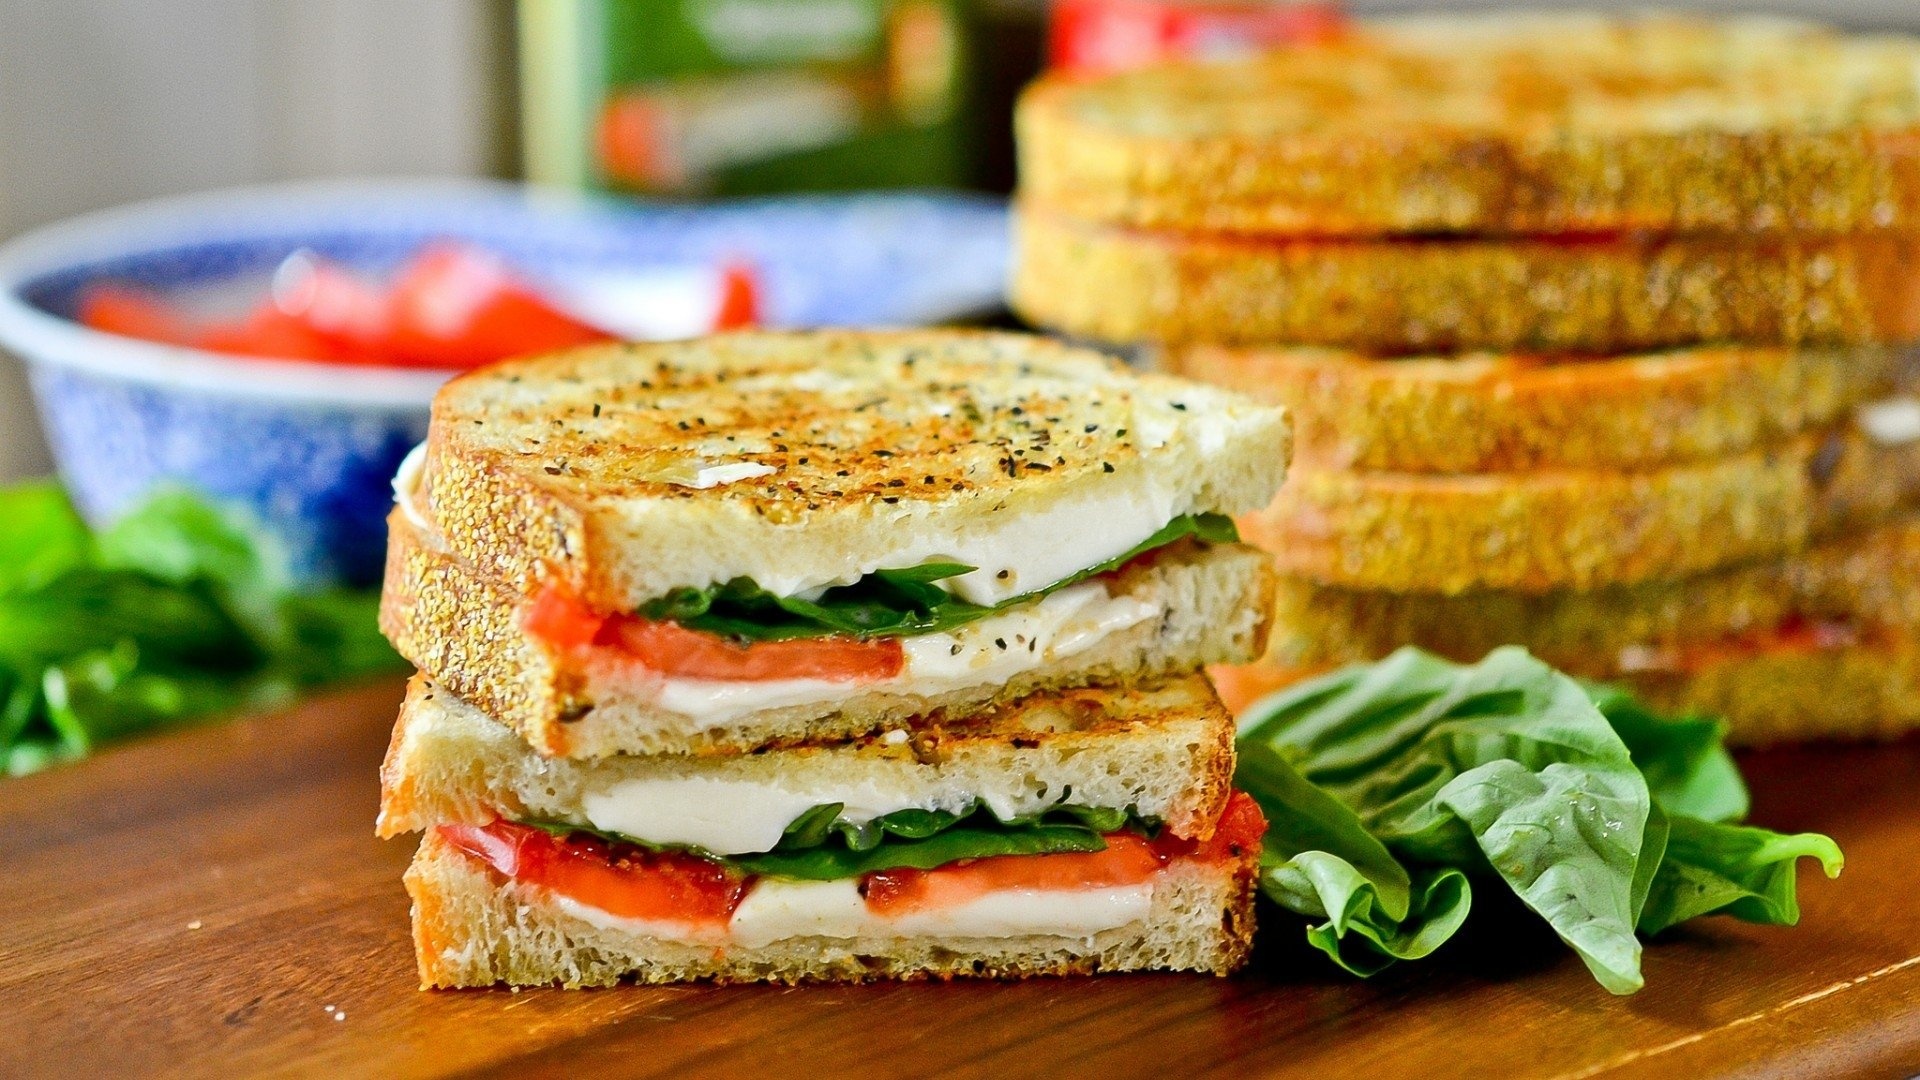 Sandwich: Includes at least two slices of bread stuffed with a choice filling. 1920x1080 Full HD Wallpaper.